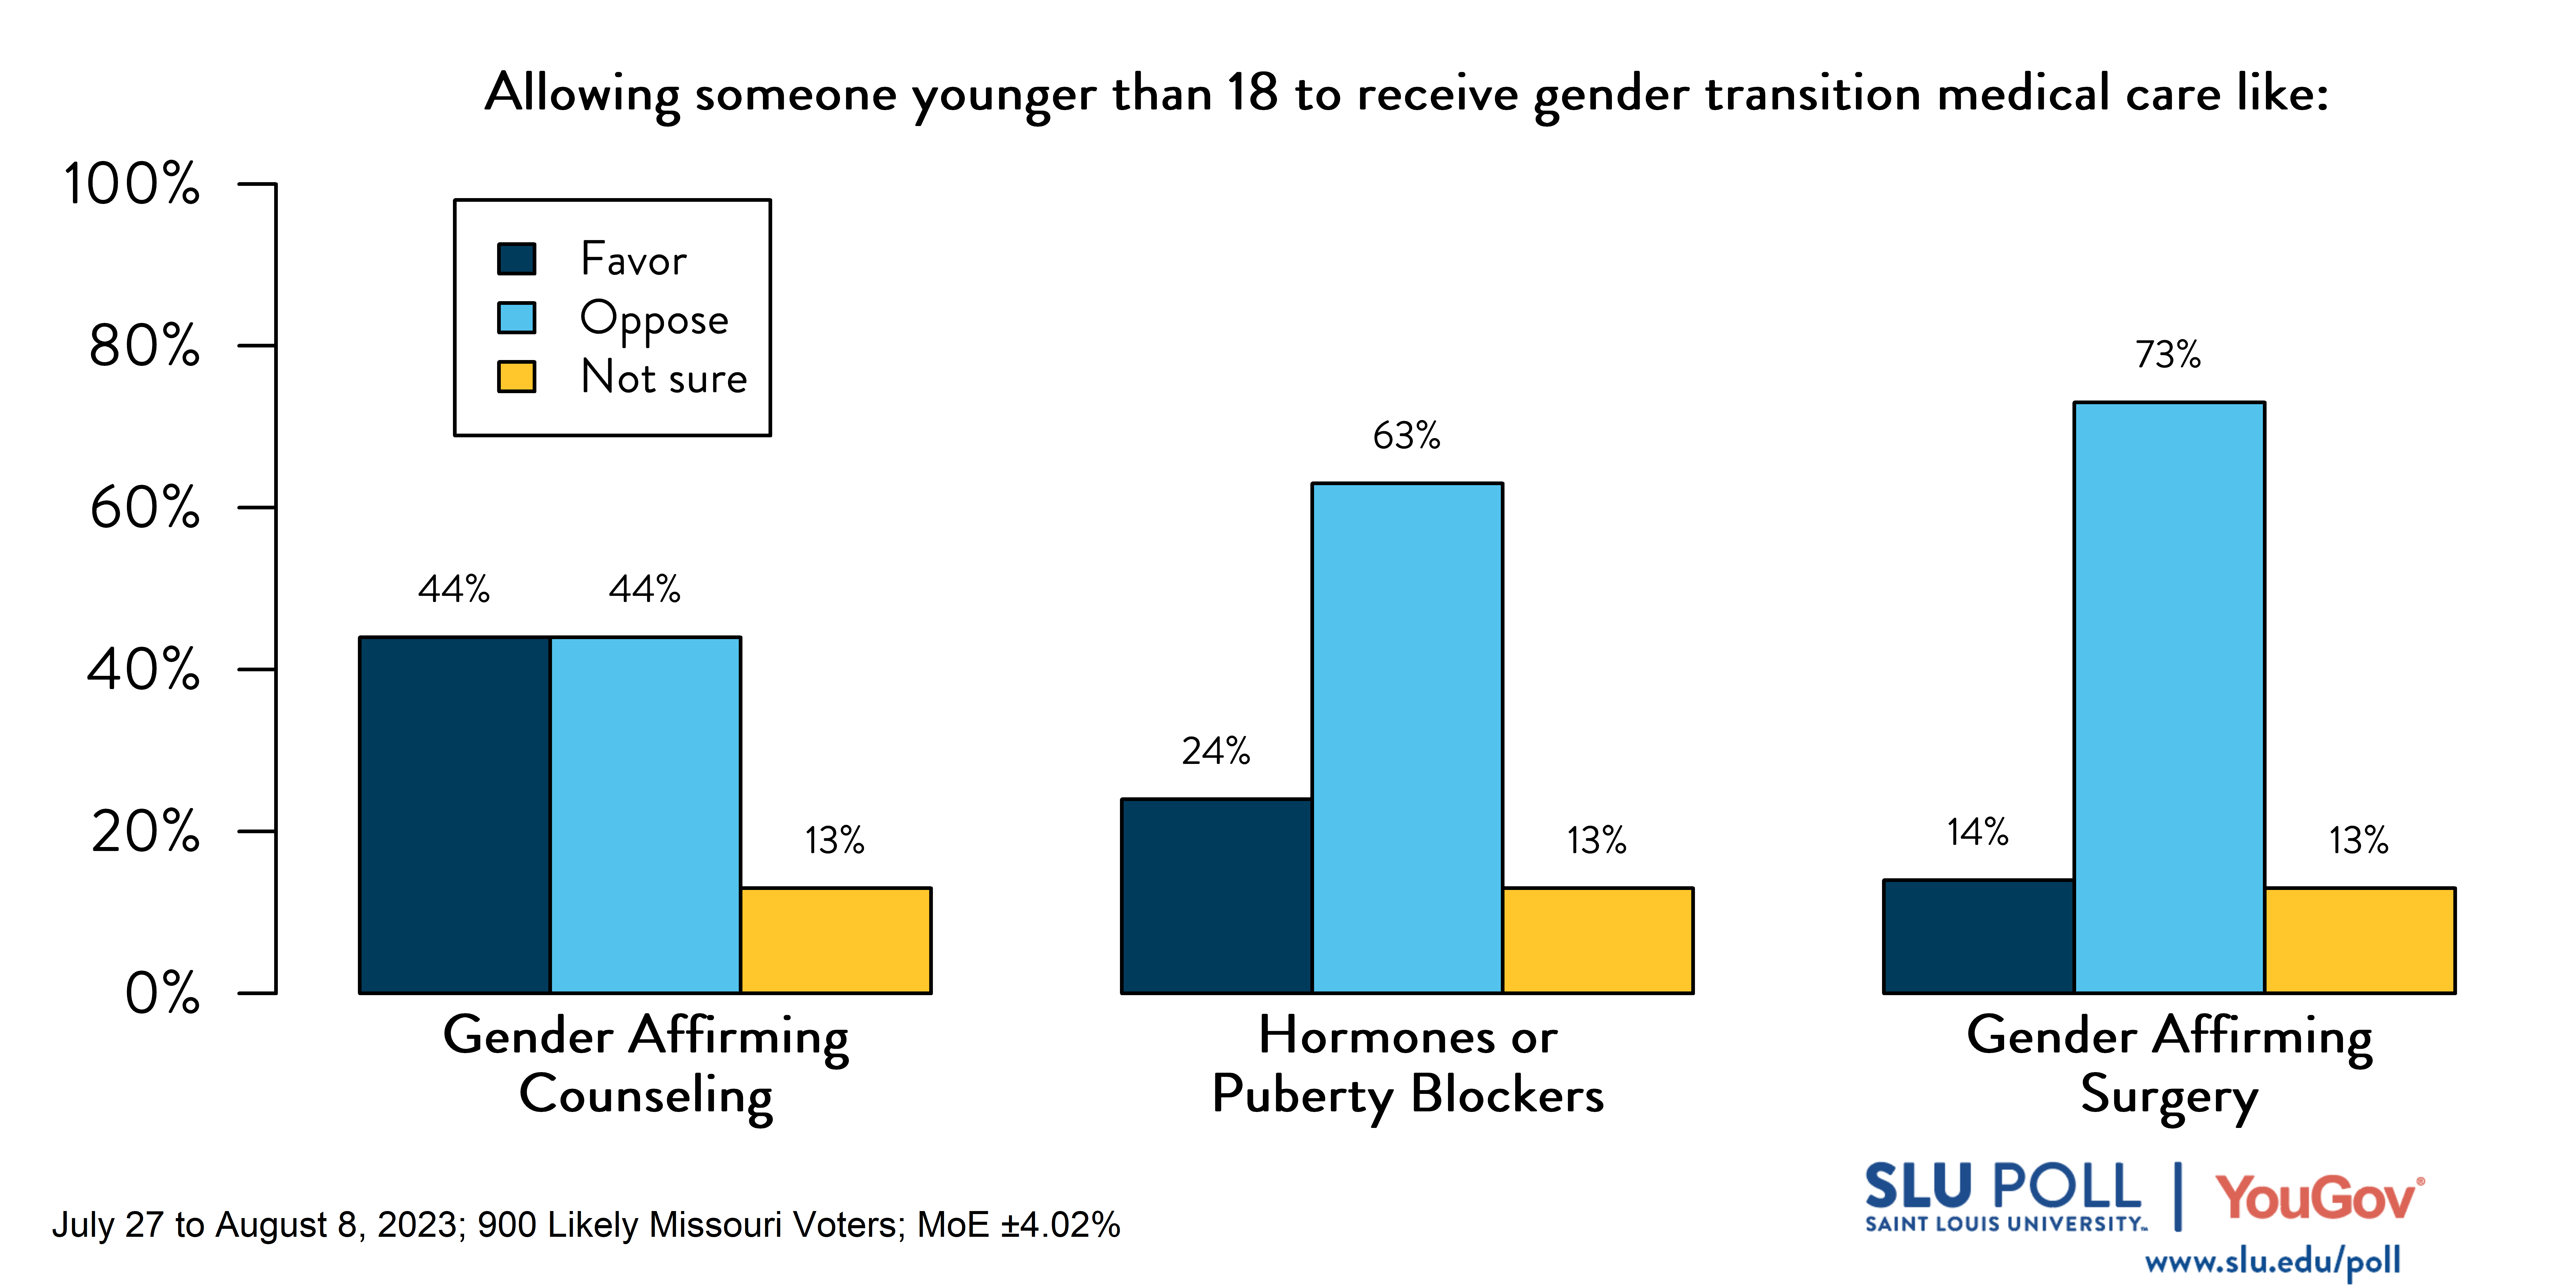 Do you favor or oppose allowing someone younger than 18 to receive gender transition medical care like: Gender Affirming Counseling: Favor 44% Oppose 44%, Not sure 13%, Hormones or Puberty blockers: Favor 24%, Oppose 63%, Not sure 13%; Gender Affirming Surgery 14%, Oppose 73%, Not sure, 13%.